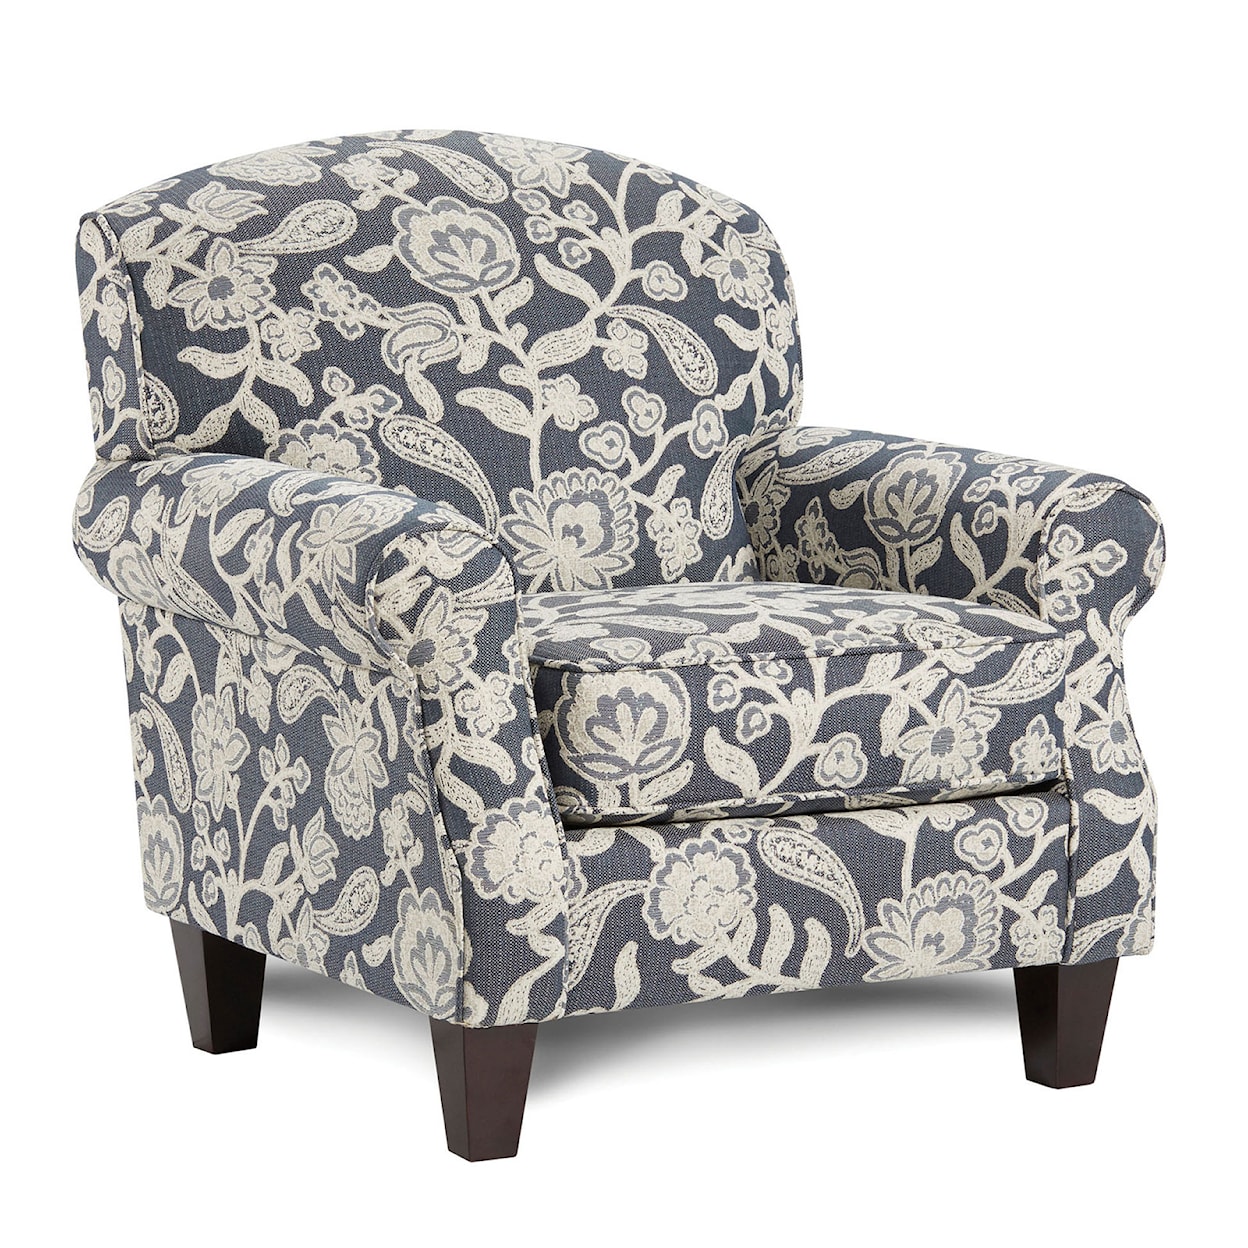 Furniture of America Porthcawl Accent Chair, Floral